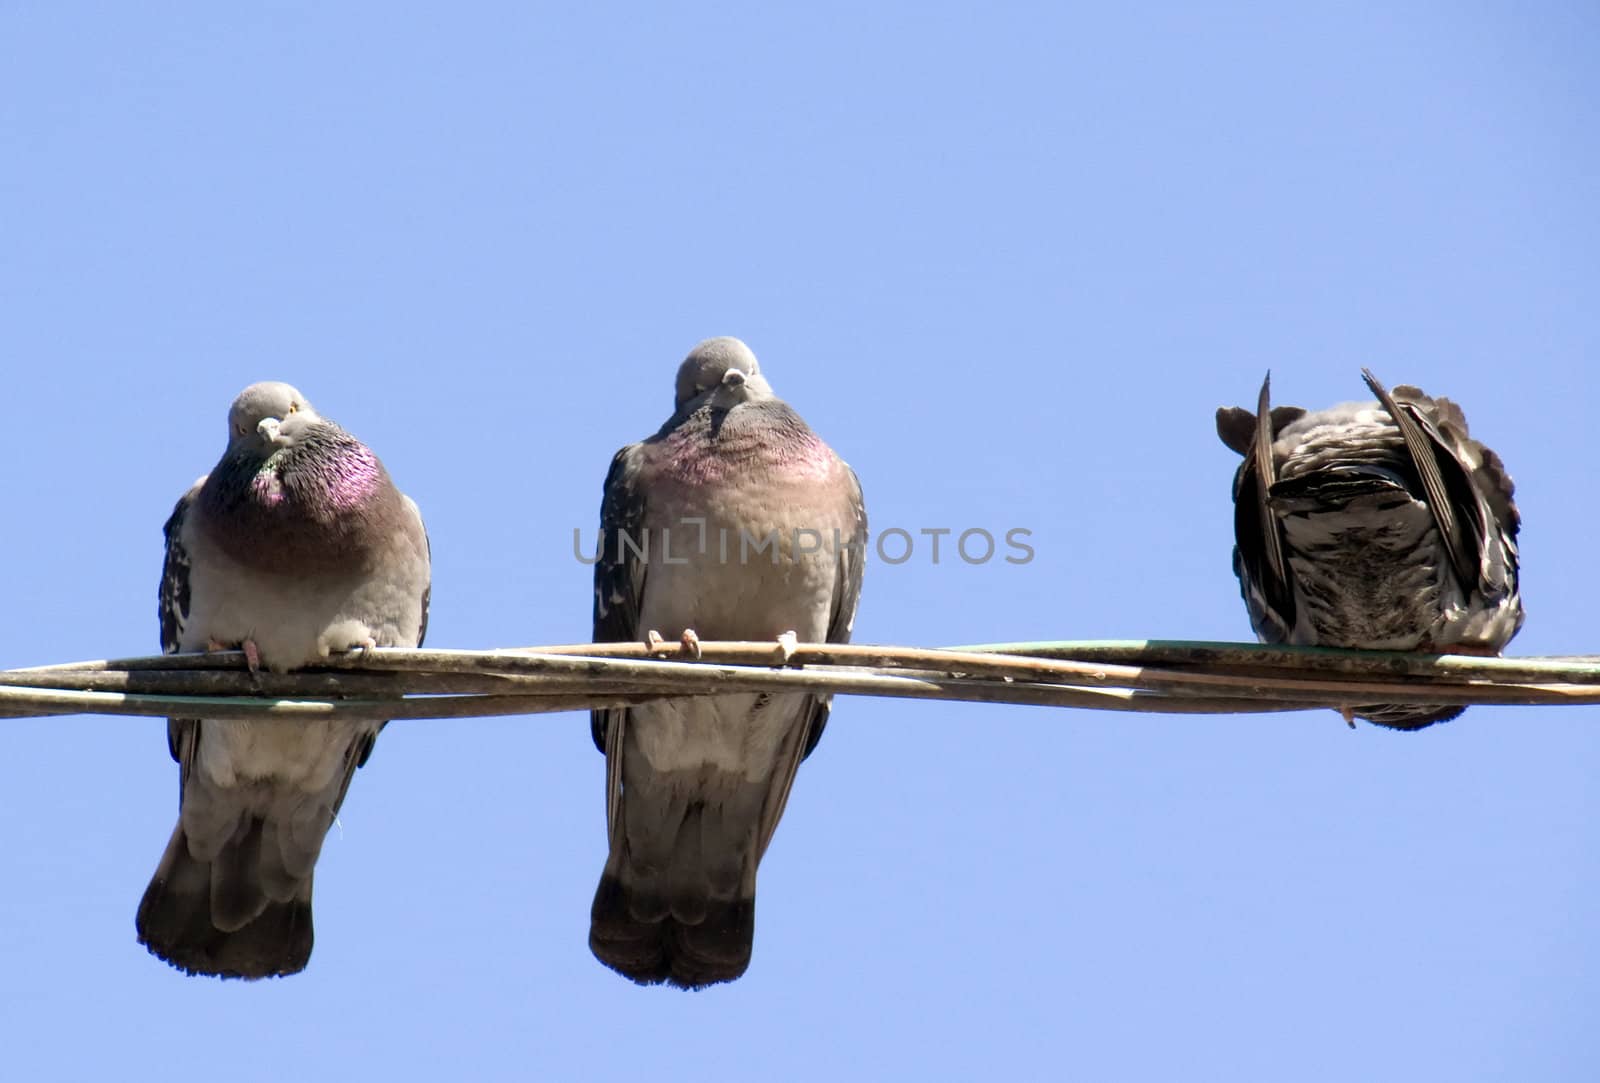 Pigeons warming themselves in the spring sun, sitting on the wire.